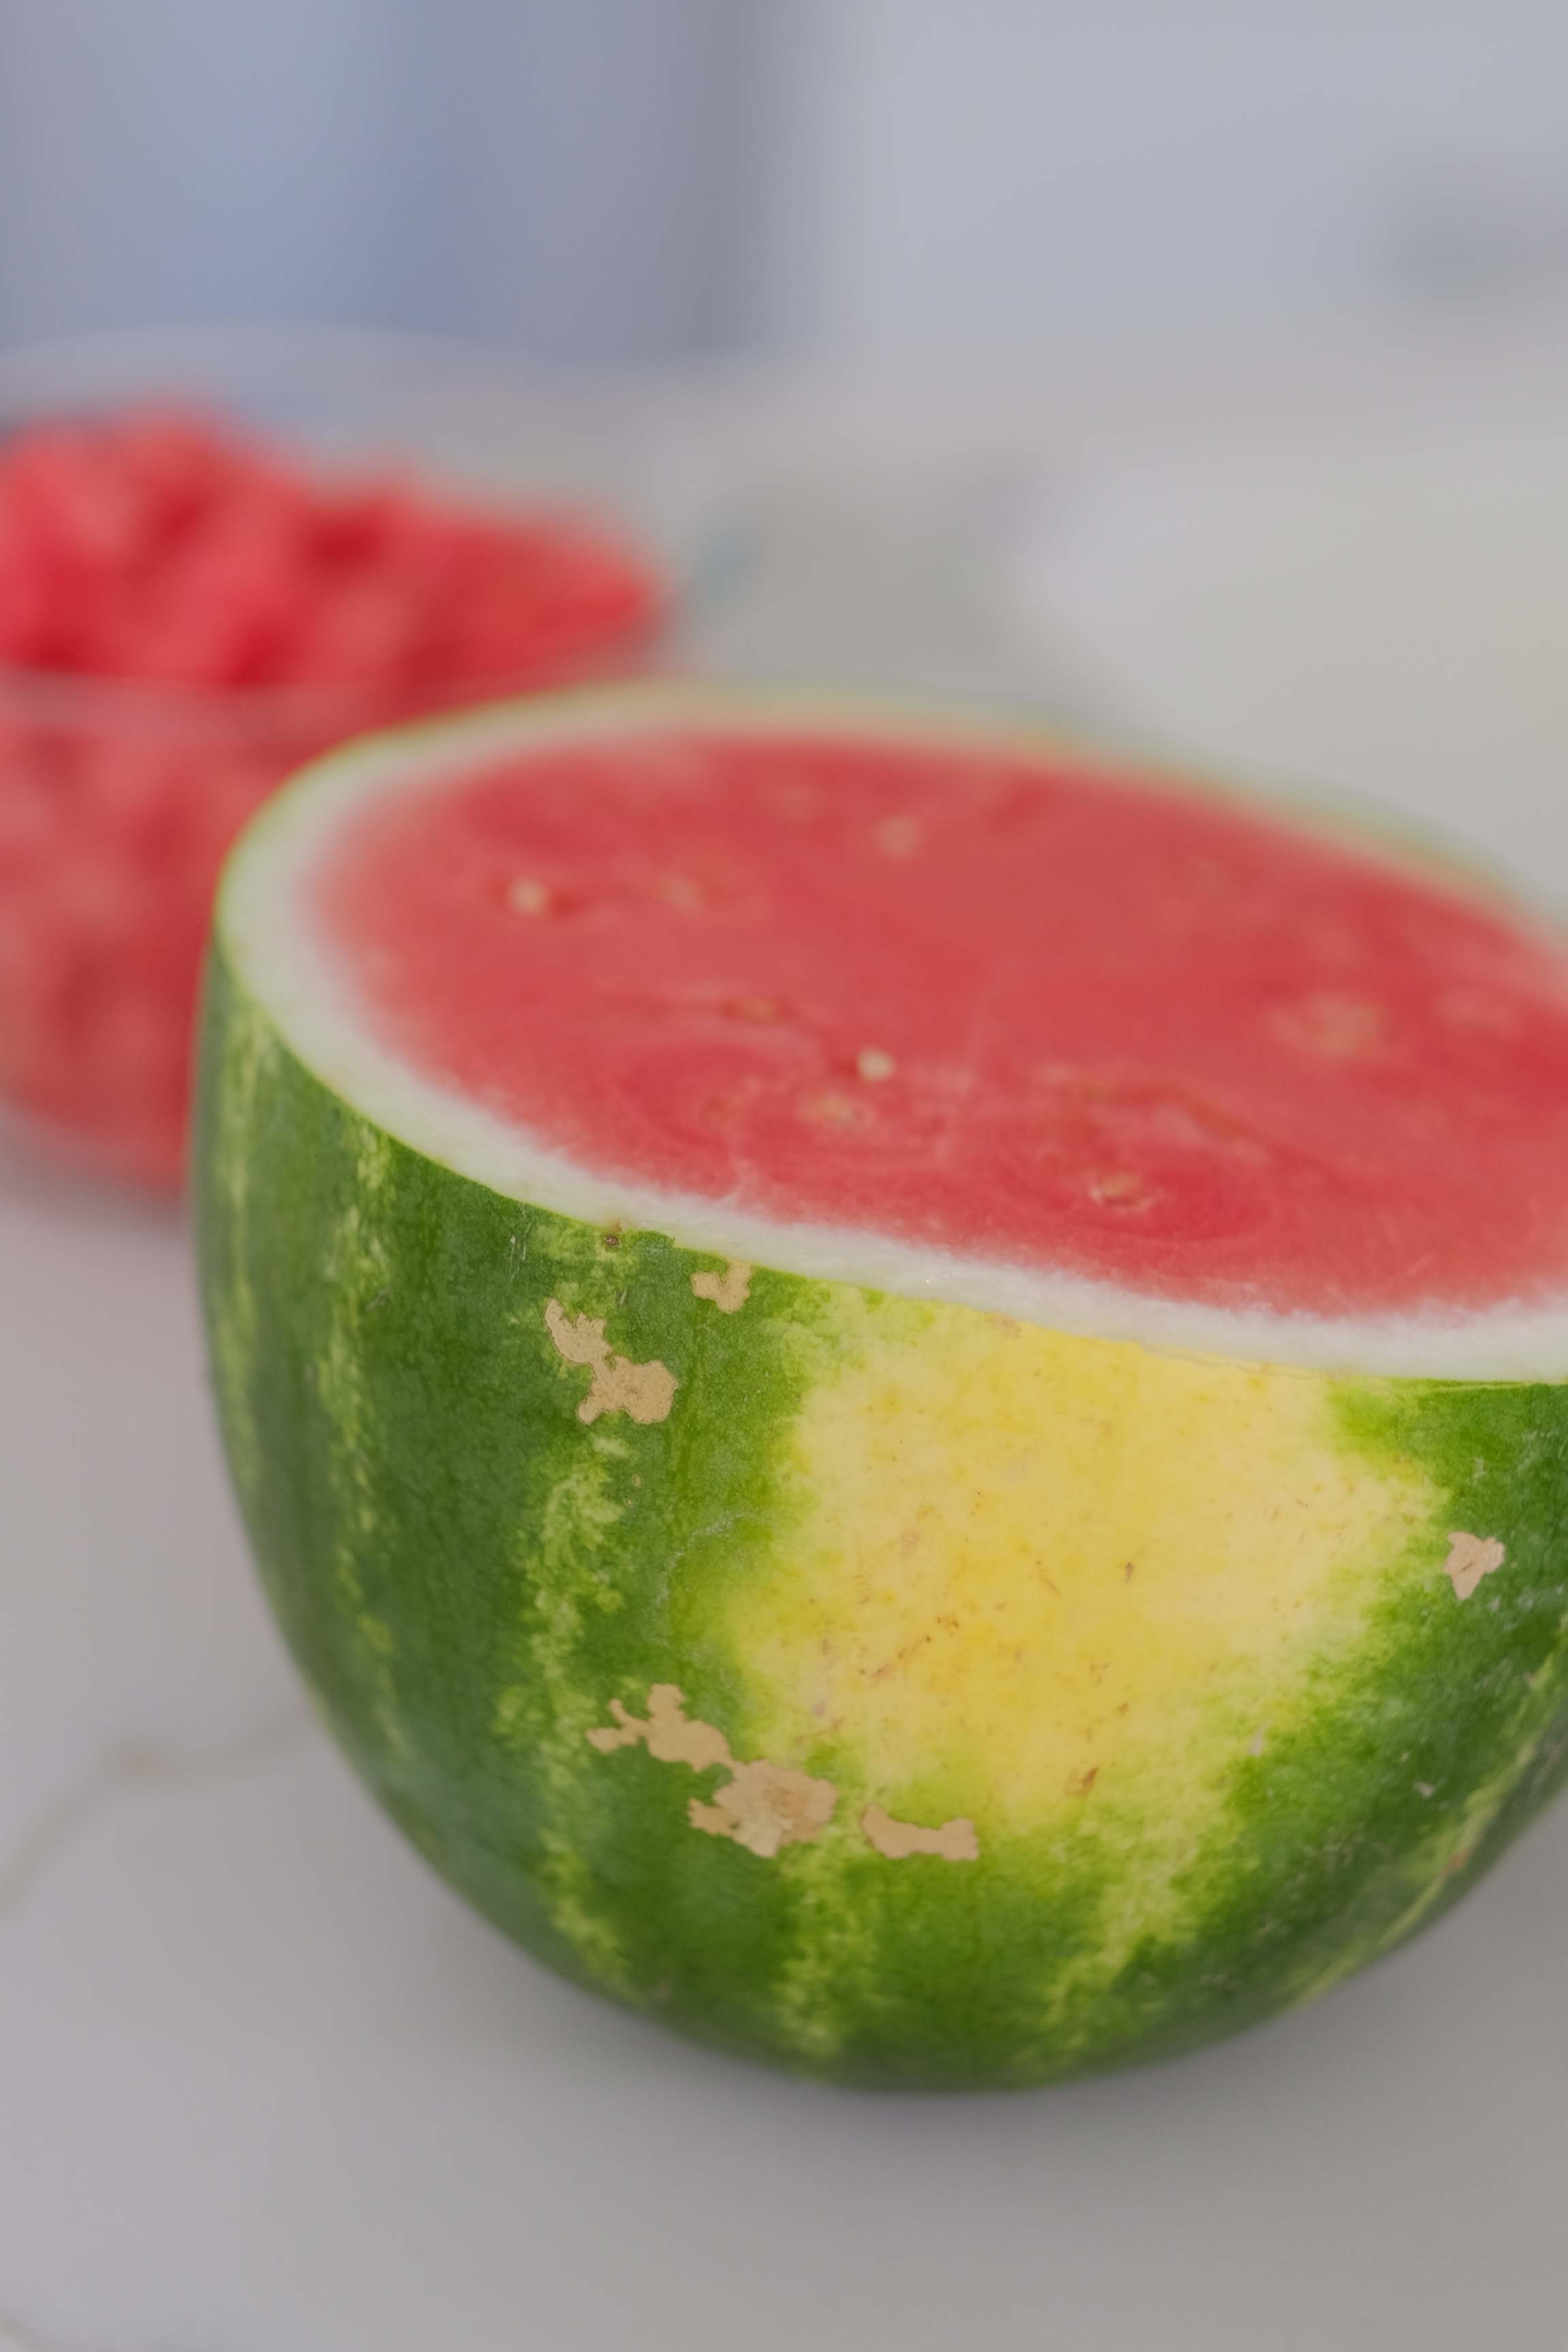 Half a cut seedless watermelon sitting on a white counter with a bowl of cubed watermelon in the background